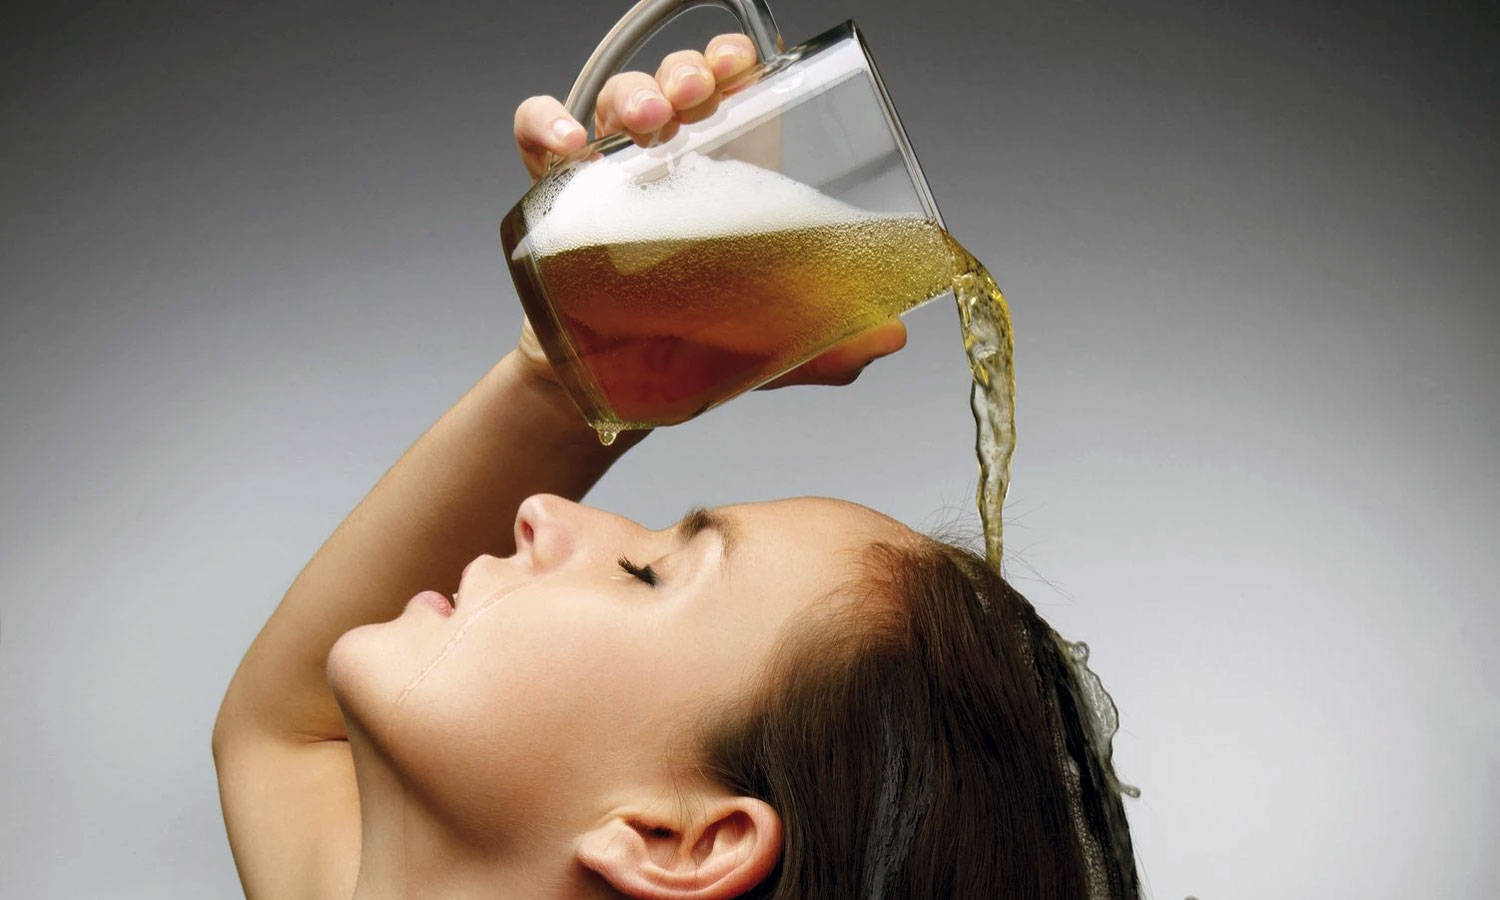 How To Use Beer For Hair